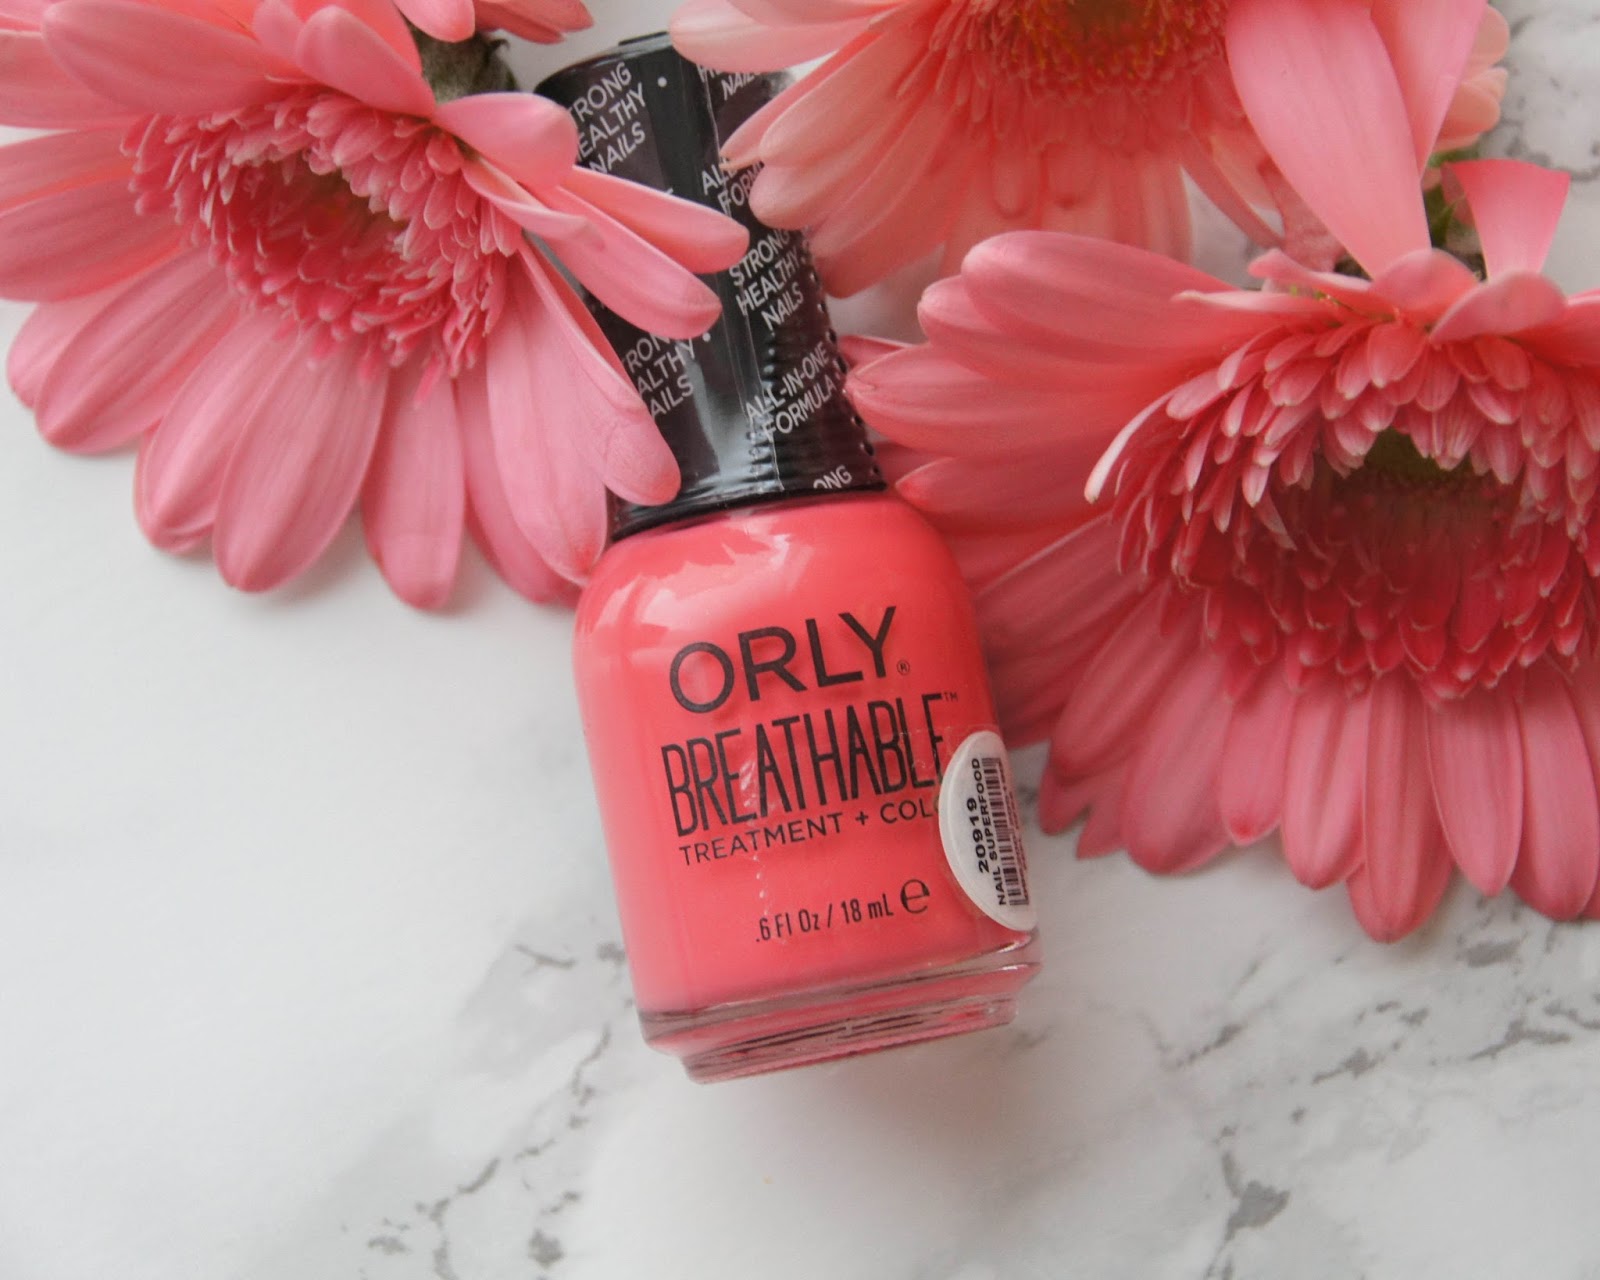 10. Orly Breathable Treatment + Color Nail Polish in "Toenail Colored" - wide 3